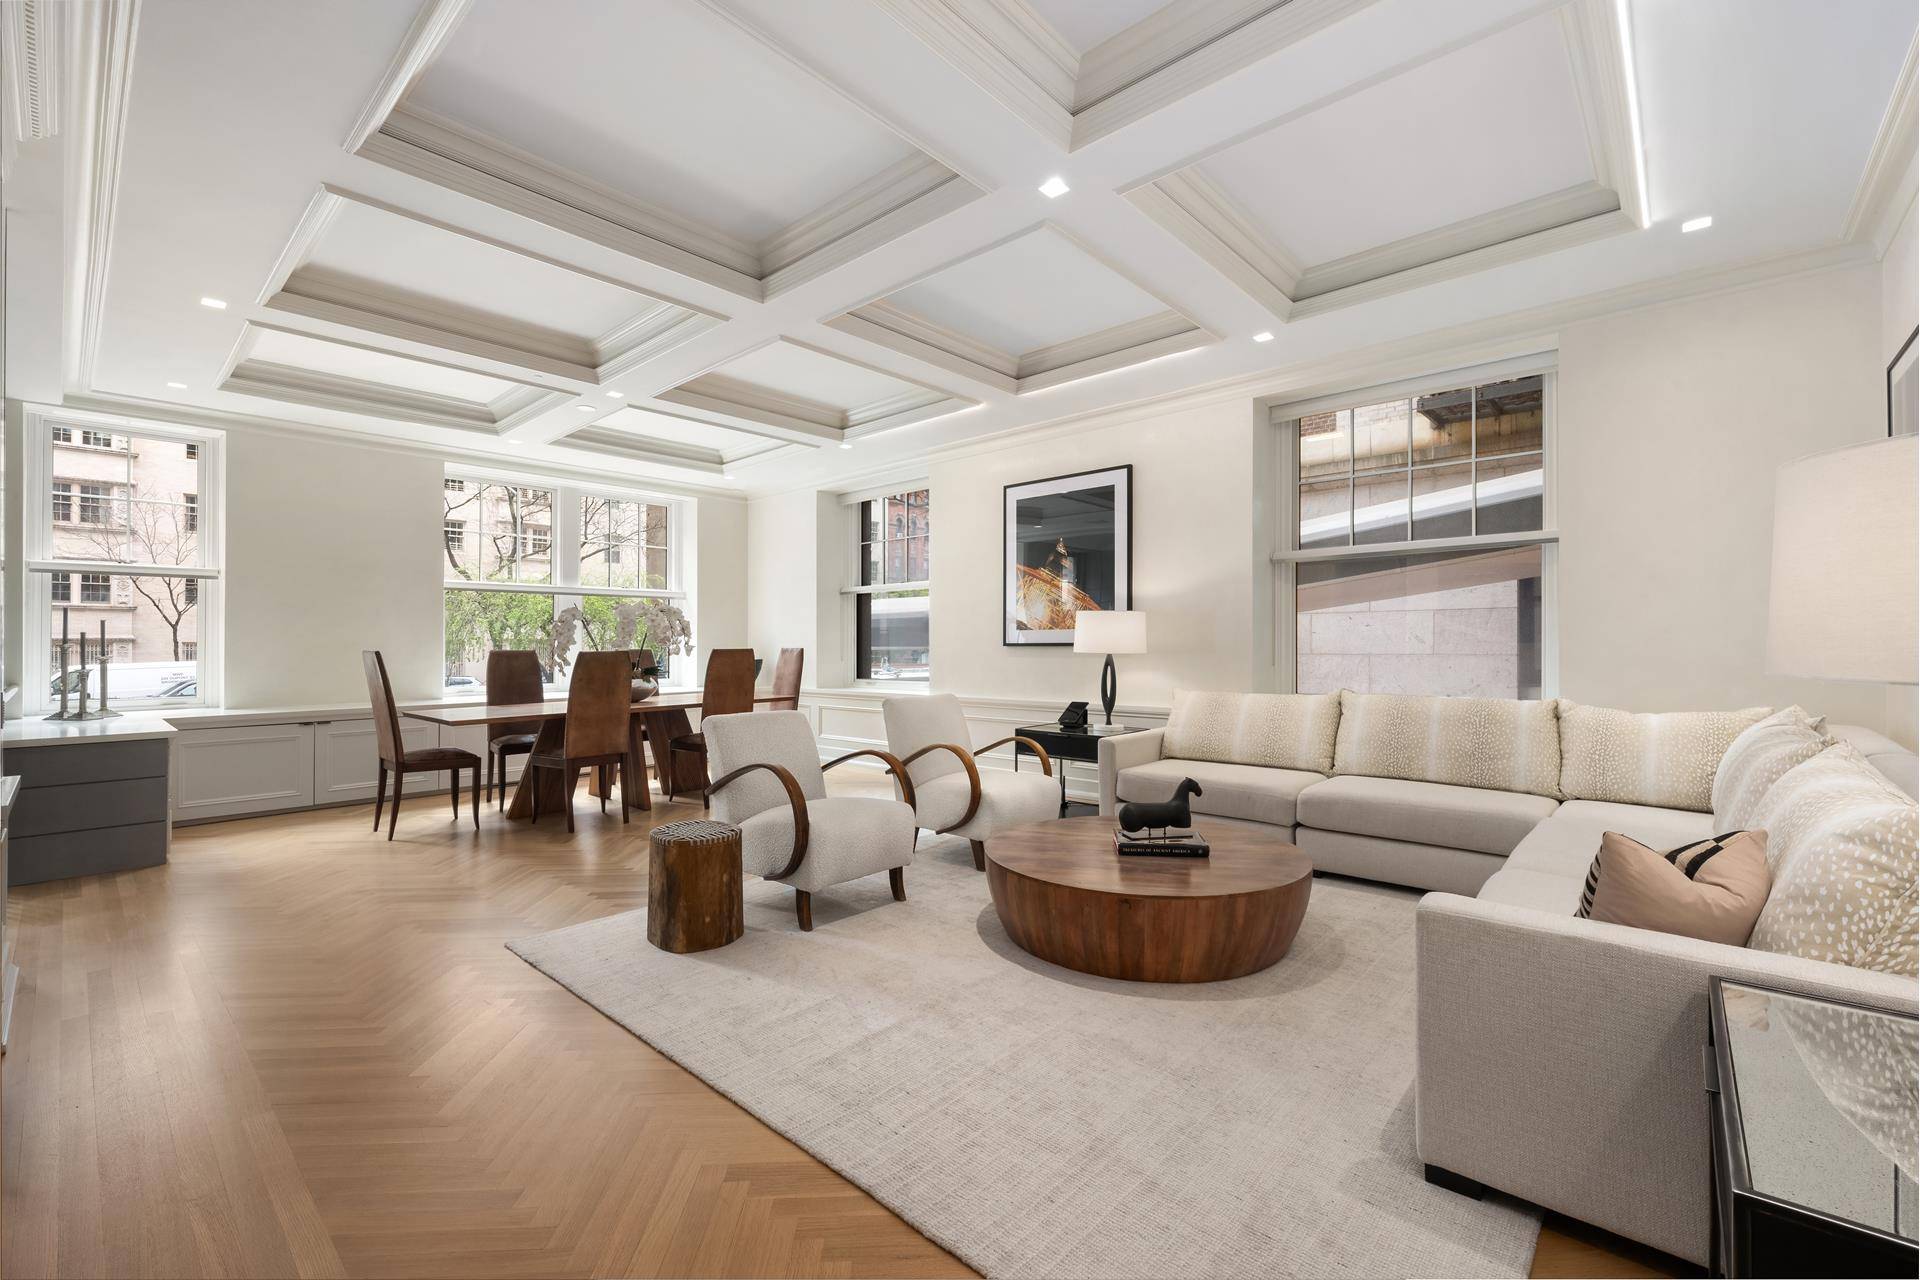 Townhouse living on Park Avenue within a premiere Co op 830 Park Avenue Maisonette A830 Park Avenue's Maisonette A is, quite simply, one of the Upper East Side's truly unique ...